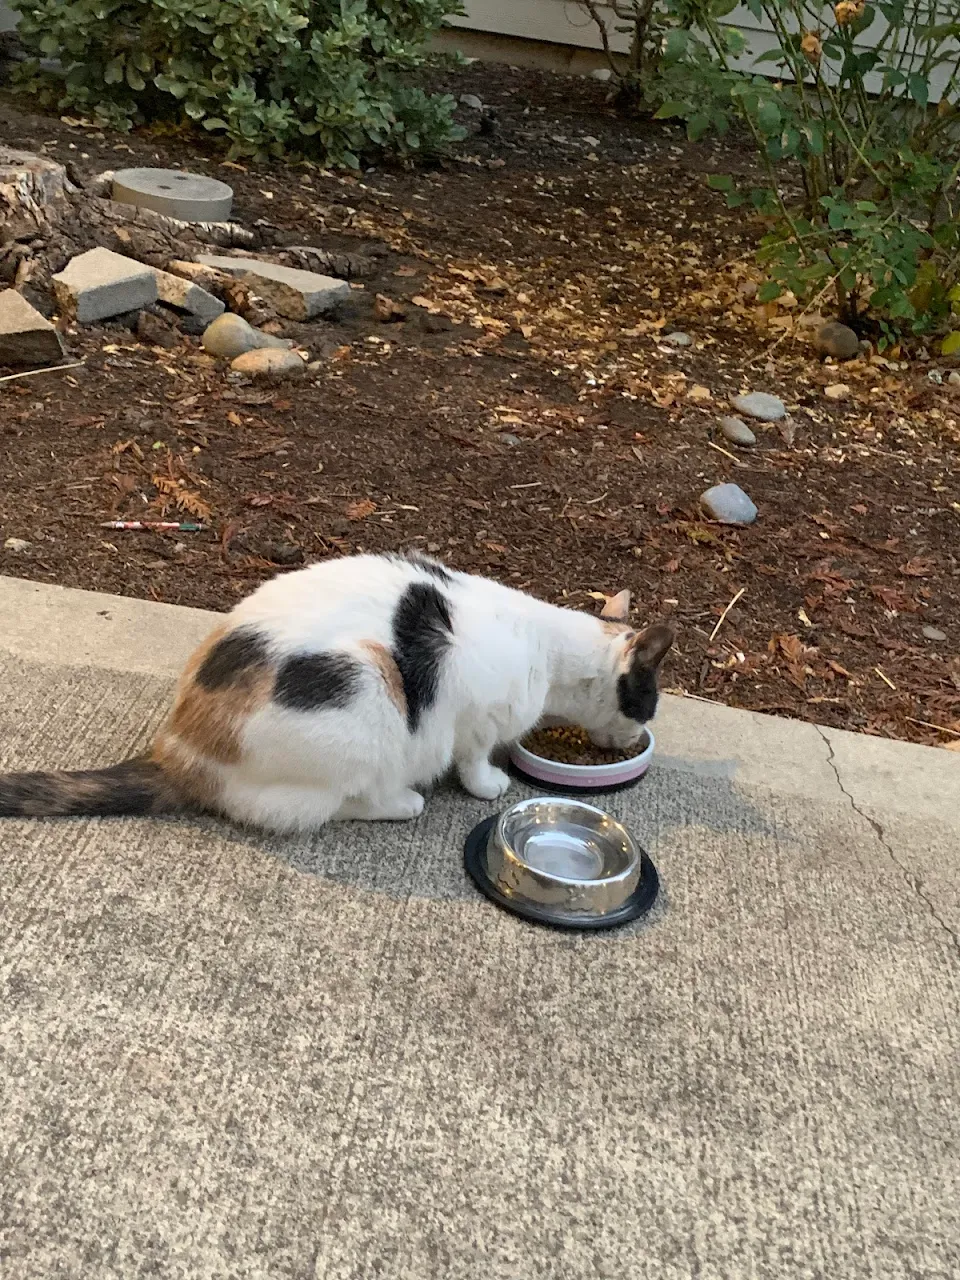 Possibly someone’s outdoor cat, but he seems hungry, been meow-ing outside my apartment for hours, I had seen him outside alone during a rainy night once and last week’s heat wave. If he has an owner idk what they’re doing, what should I do?